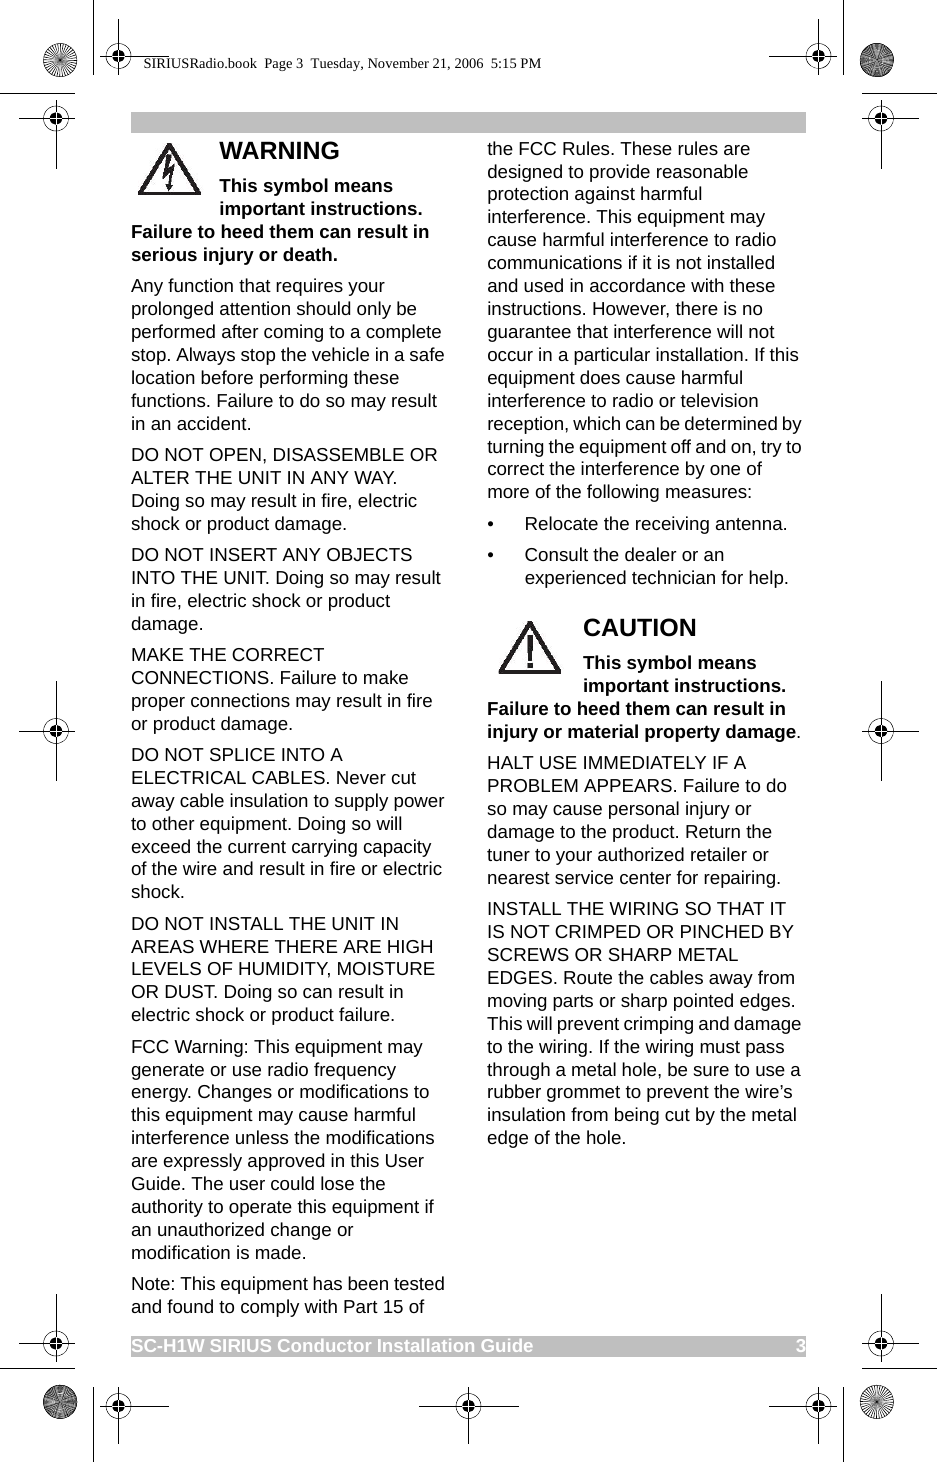 SC-H1W SIRIUS Conductor Installation Guide                                                     3WARNINGThis symbol means important instructions. Failure to heed them can result in serious injury or death. Any function that requires your prolonged attention should only be performed after coming to a complete stop. Always stop the vehicle in a safe location before performing these functions. Failure to do so may result in an accident.DO NOT OPEN, DISASSEMBLE OR ALTER THE UNIT IN ANY WAY. Doing so may result in fire, electric shock or product damage.DO NOT INSERT ANY OBJECTS INTO THE UNIT. Doing so may result in fire, electric shock or product damage.MAKE THE CORRECT CONNECTIONS. Failure to make proper connections may result in fire or product damage.DO NOT SPLICE INTO A ELECTRICAL CABLES. Never cut away cable insulation to supply power to other equipment. Doing so will exceed the current carrying capacity of the wire and result in fire or electric shock.DO NOT INSTALL THE UNIT IN AREAS WHERE THERE ARE HIGH LEVELS OF HUMIDITY, MOISTURE OR DUST. Doing so can result in electric shock or product failure.FCC Warning: This equipment may generate or use radio frequency energy. Changes or modifications to this equipment may cause harmful interference unless the modifications are expressly approved in this User Guide. The user could lose the authority to operate this equipment if an unauthorized change or modification is made.Note: This equipment has been tested and found to comply with Part 15 of the FCC Rules. These rules are designed to provide reasonable protection against harmful interference. This equipment may cause harmful interference to radio communications if it is not installed and used in accordance with these instructions. However, there is no guarantee that interference will not occur in a particular installation. If this equipment does cause harmful interference to radio or television reception, which can be determined by turning the equipment off and on, try to correct the interference by one of more of the following measures:• Relocate the receiving antenna.• Consult the dealer or an experienced technician for help.CAUTIONThis symbol means important instructions. Failure to heed them can result in injury or material property damage.HALT USE IMMEDIATELY IF A PROBLEM APPEARS. Failure to do so may cause personal injury or damage to the product. Return the tuner to your authorized retailer or nearest service center for repairing.INSTALL THE WIRING SO THAT IT IS NOT CRIMPED OR PINCHED BY SCREWS OR SHARP METAL EDGES. Route the cables away from moving parts or sharp pointed edges. This will prevent crimping and damage to the wiring. If the wiring must pass through a metal hole, be sure to use a rubber grommet to prevent the wire’s insulation from being cut by the metal edge of the hole.SIRIUSRadio.book  Page 3  Tuesday, November 21, 2006  5:15 PM